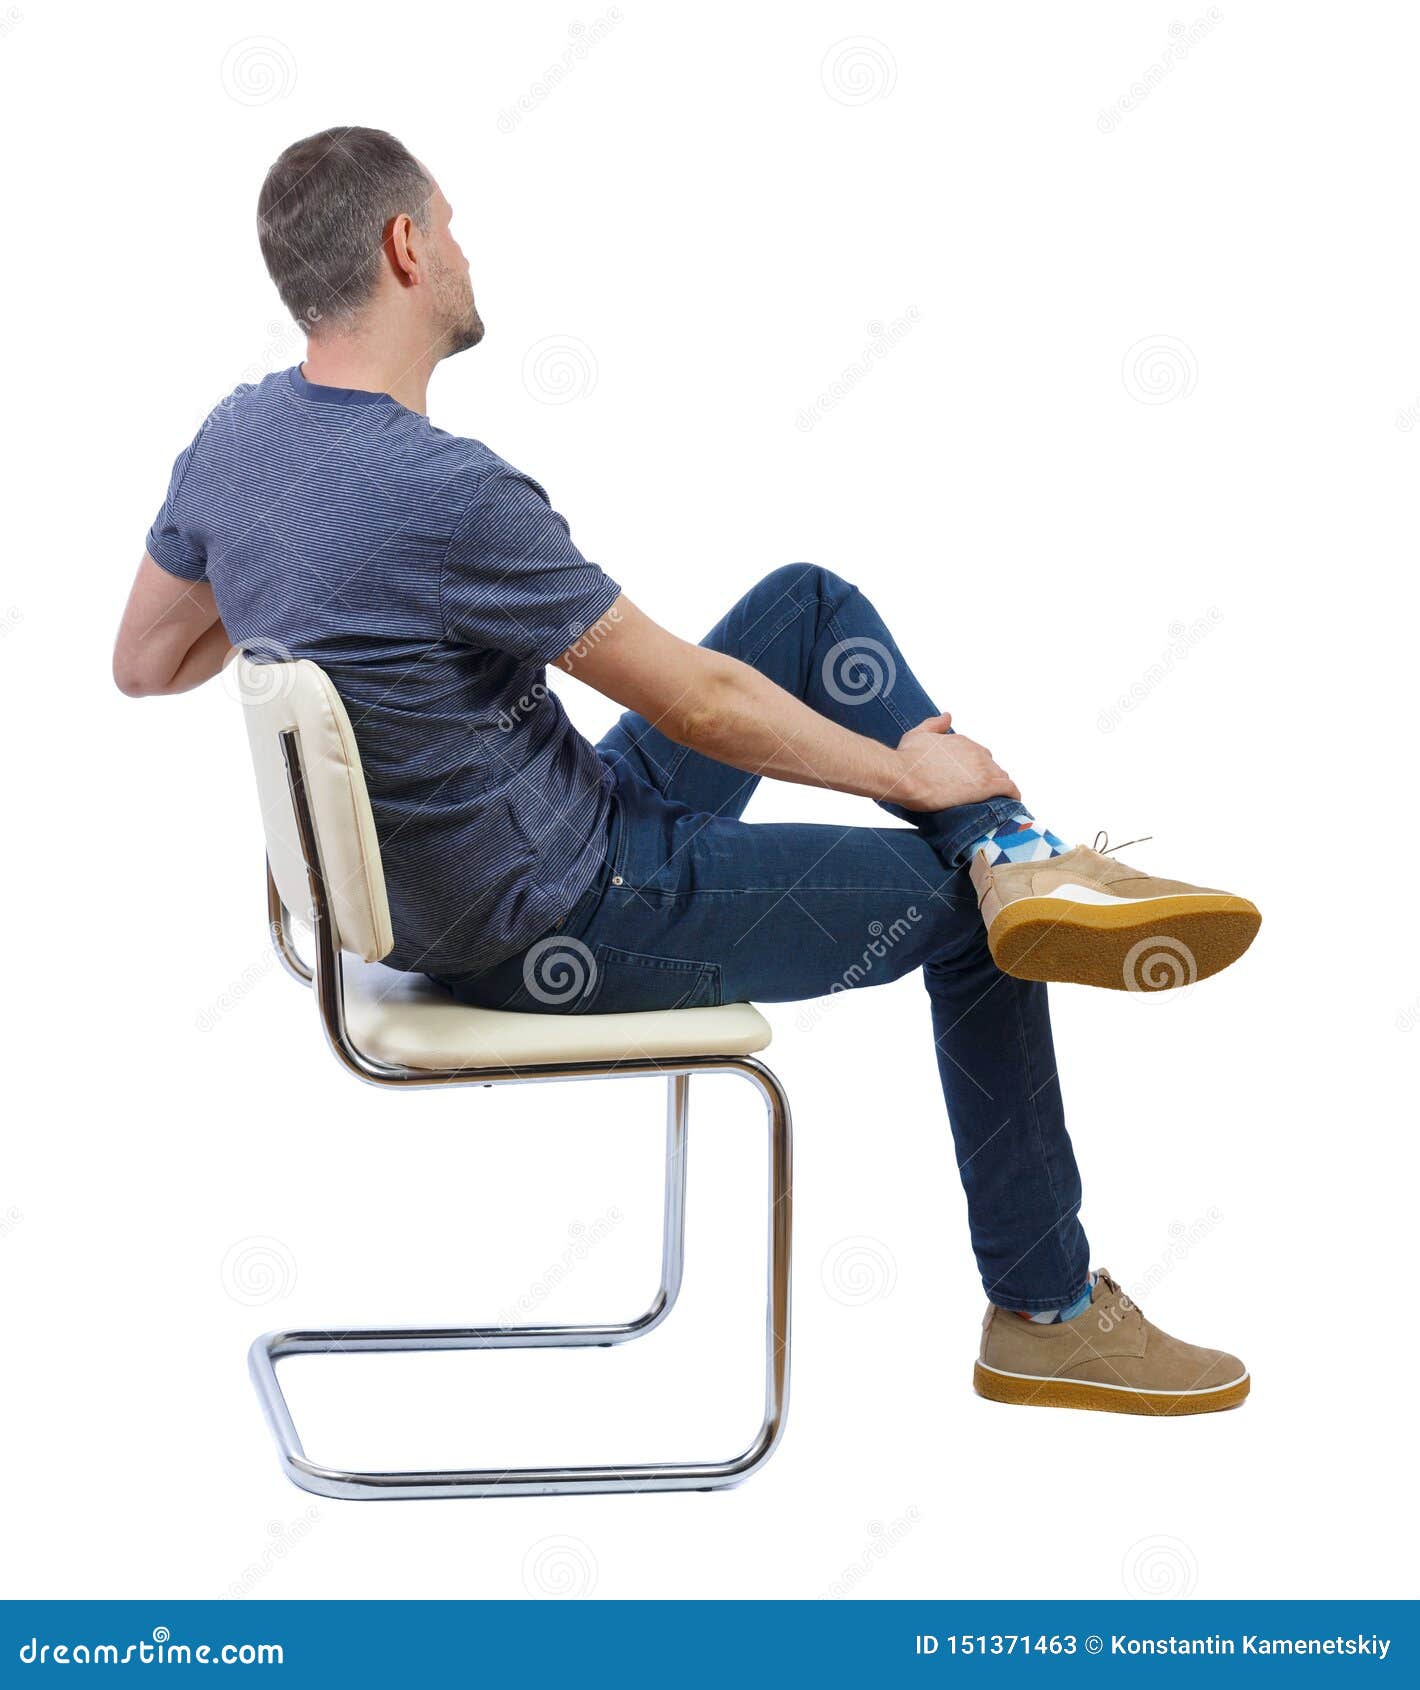 person sitting side view